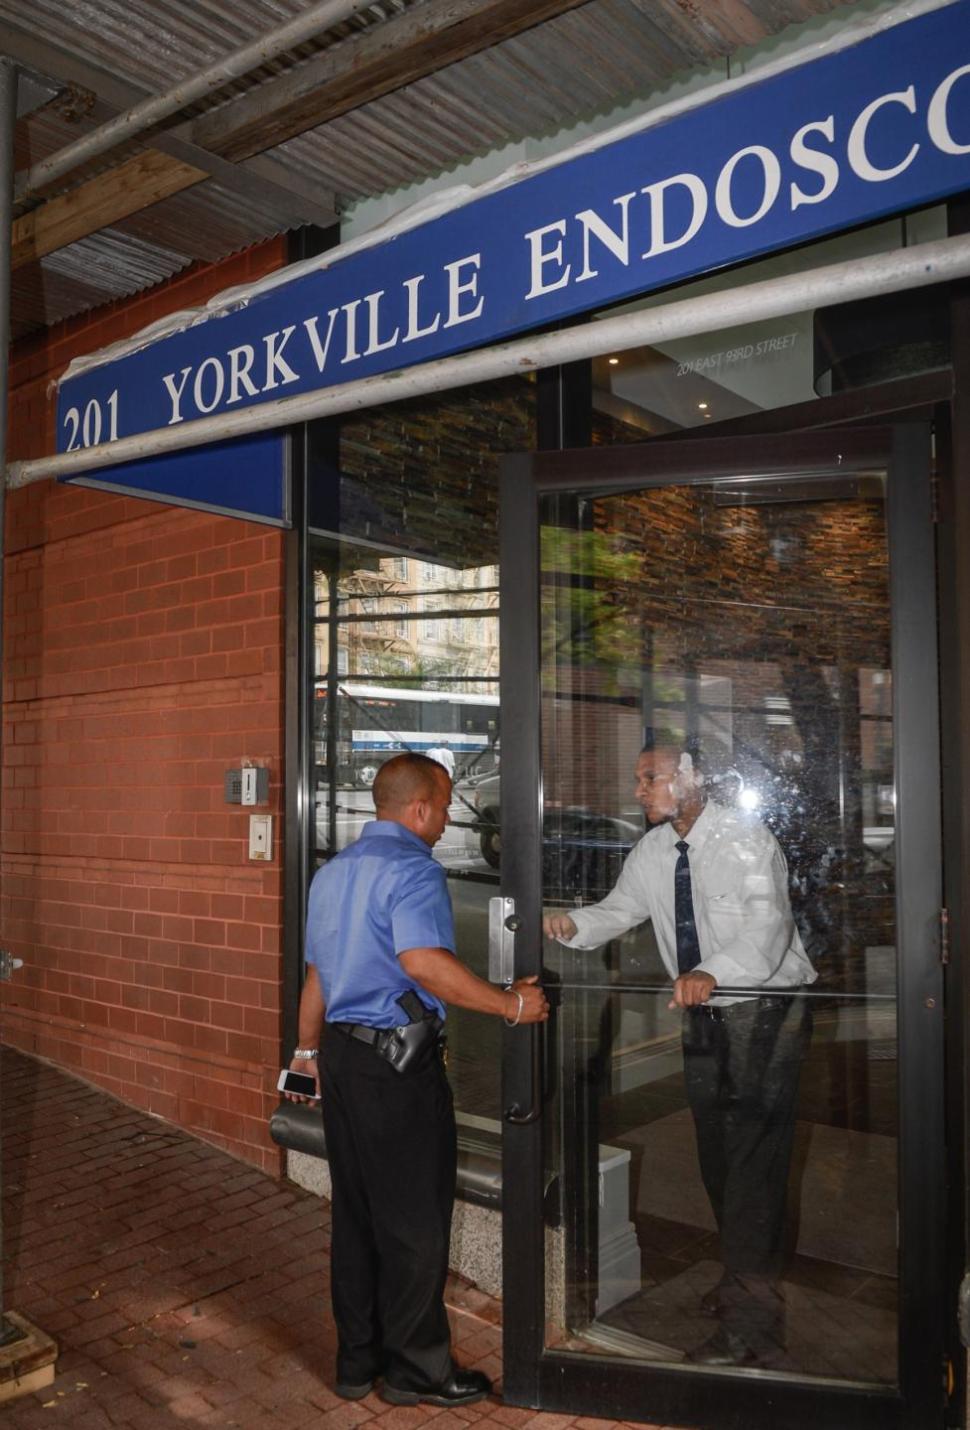 An NYPD Detective walks into Yorkville Endoscopy, where Joan Rivers' heart stopped during a procedure.